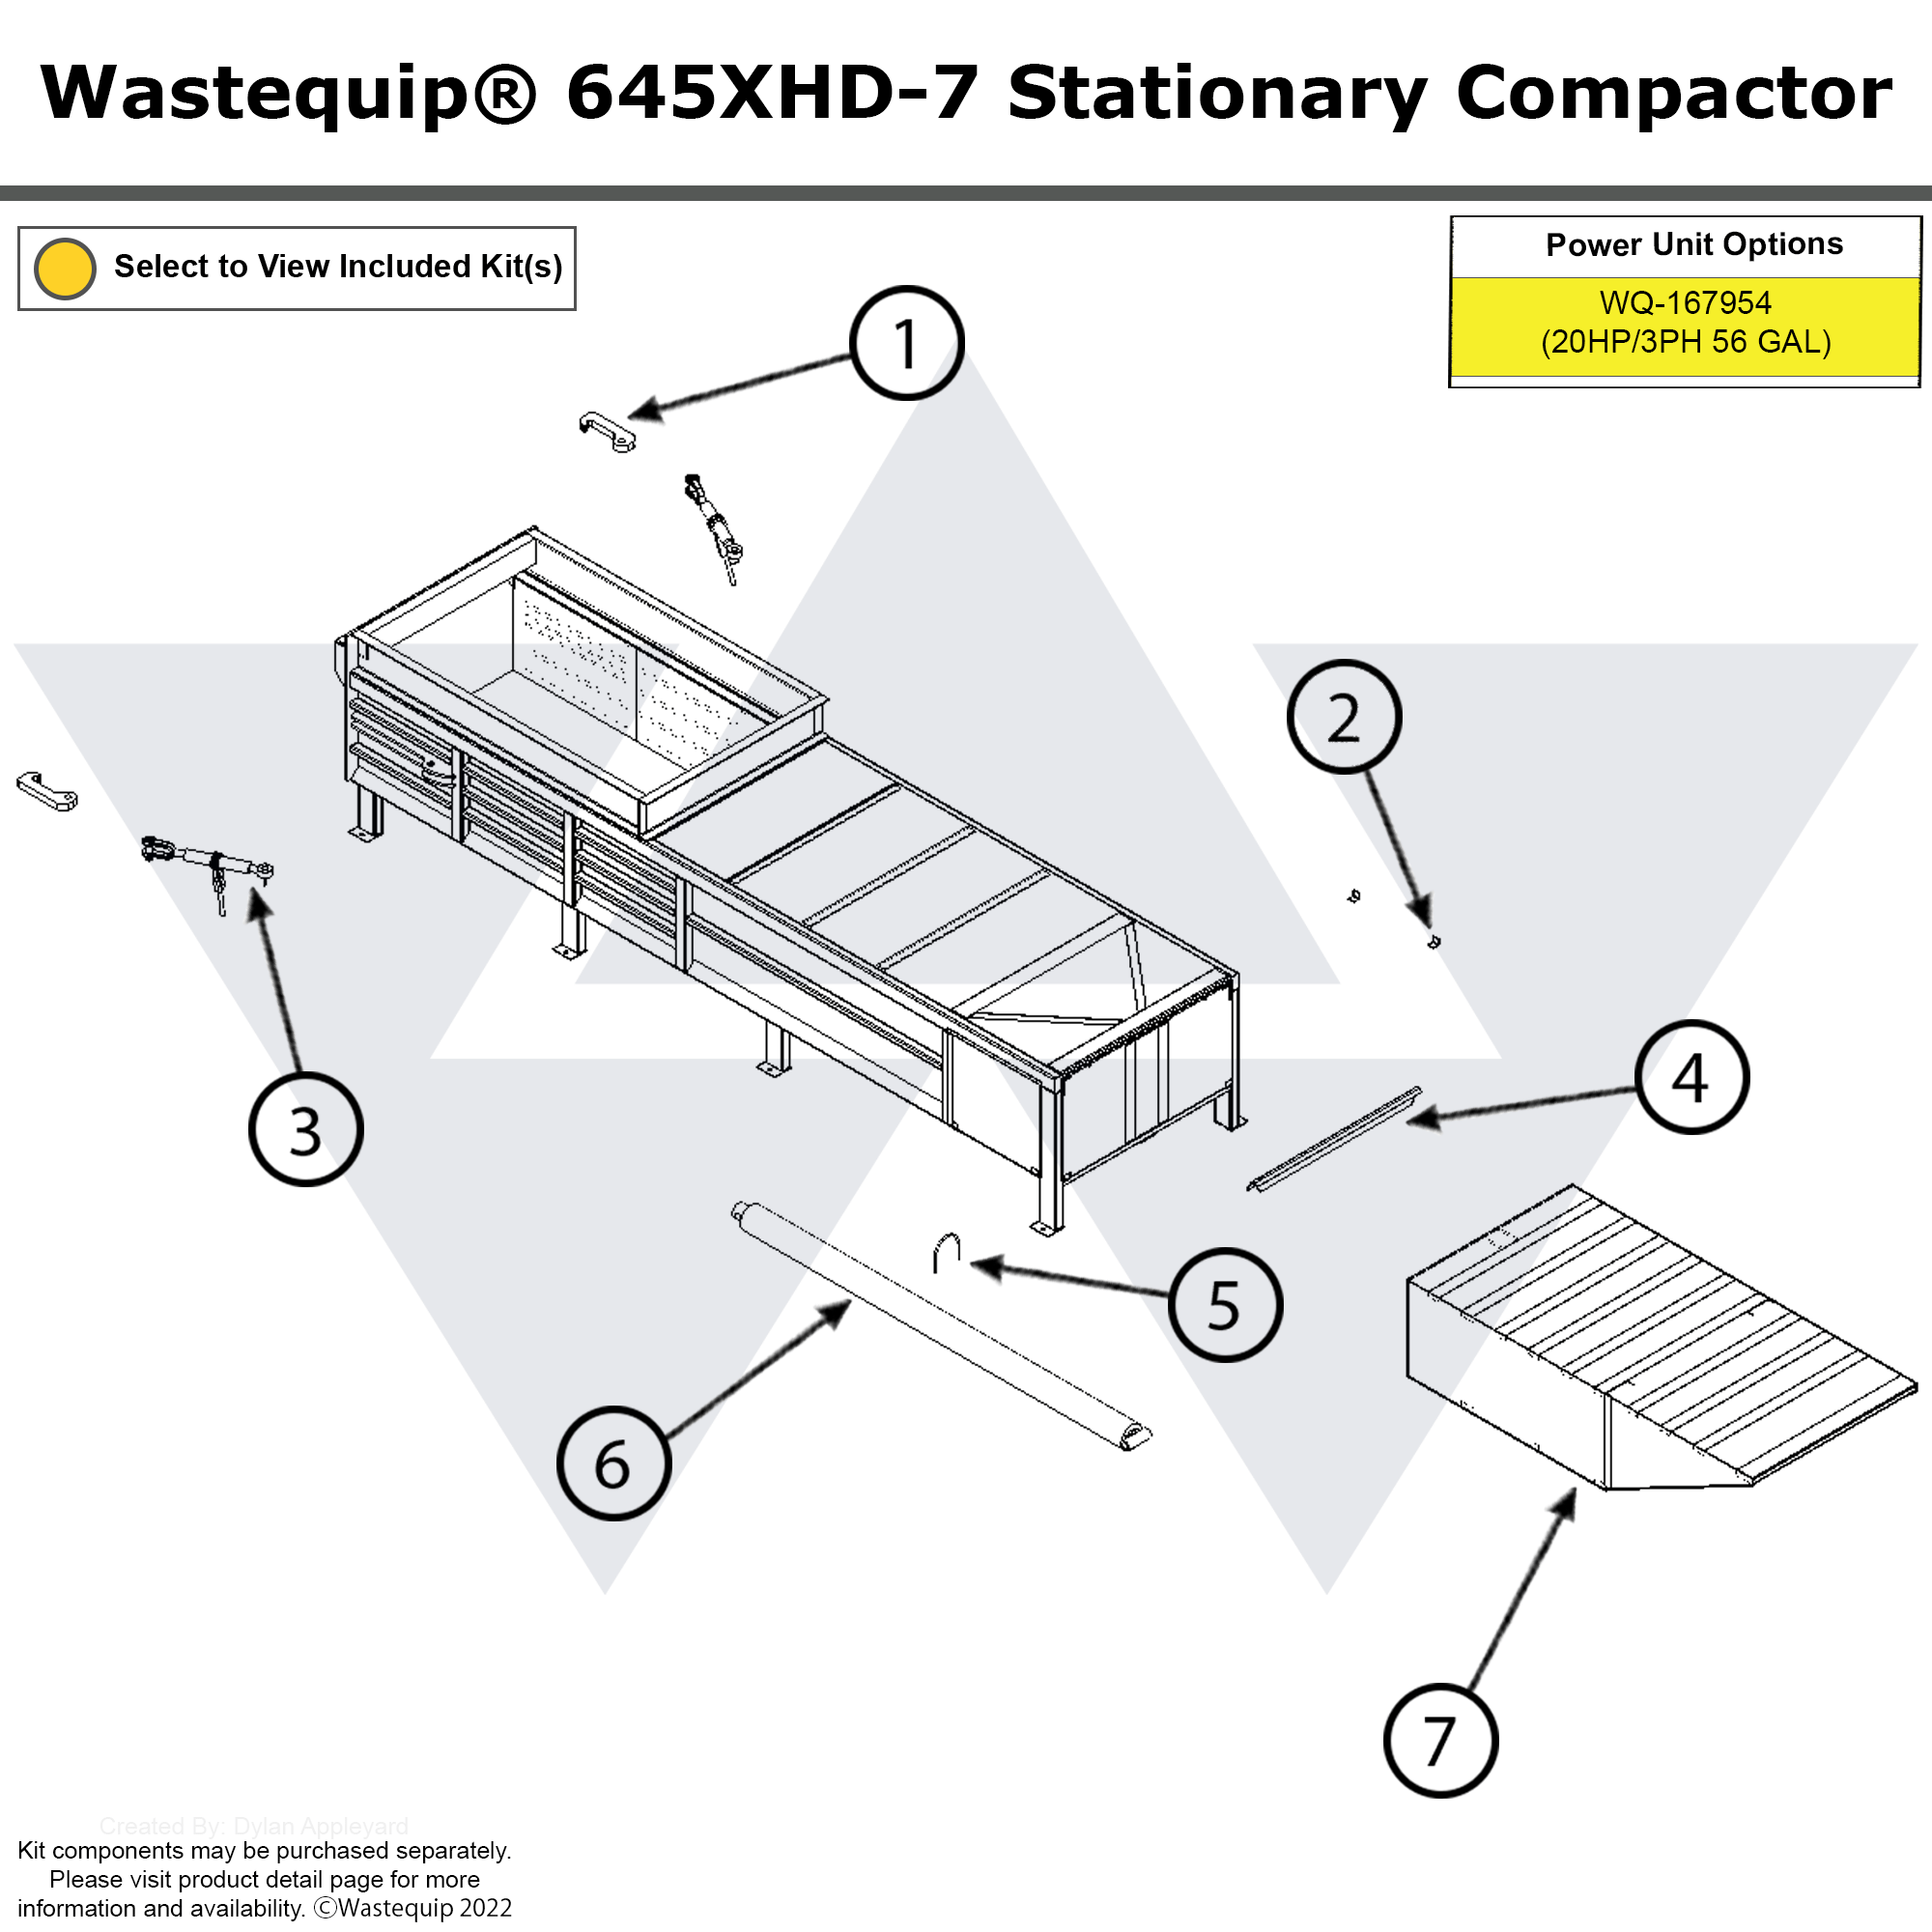 Wastequip® 645XHD-7 Stationary Compactor